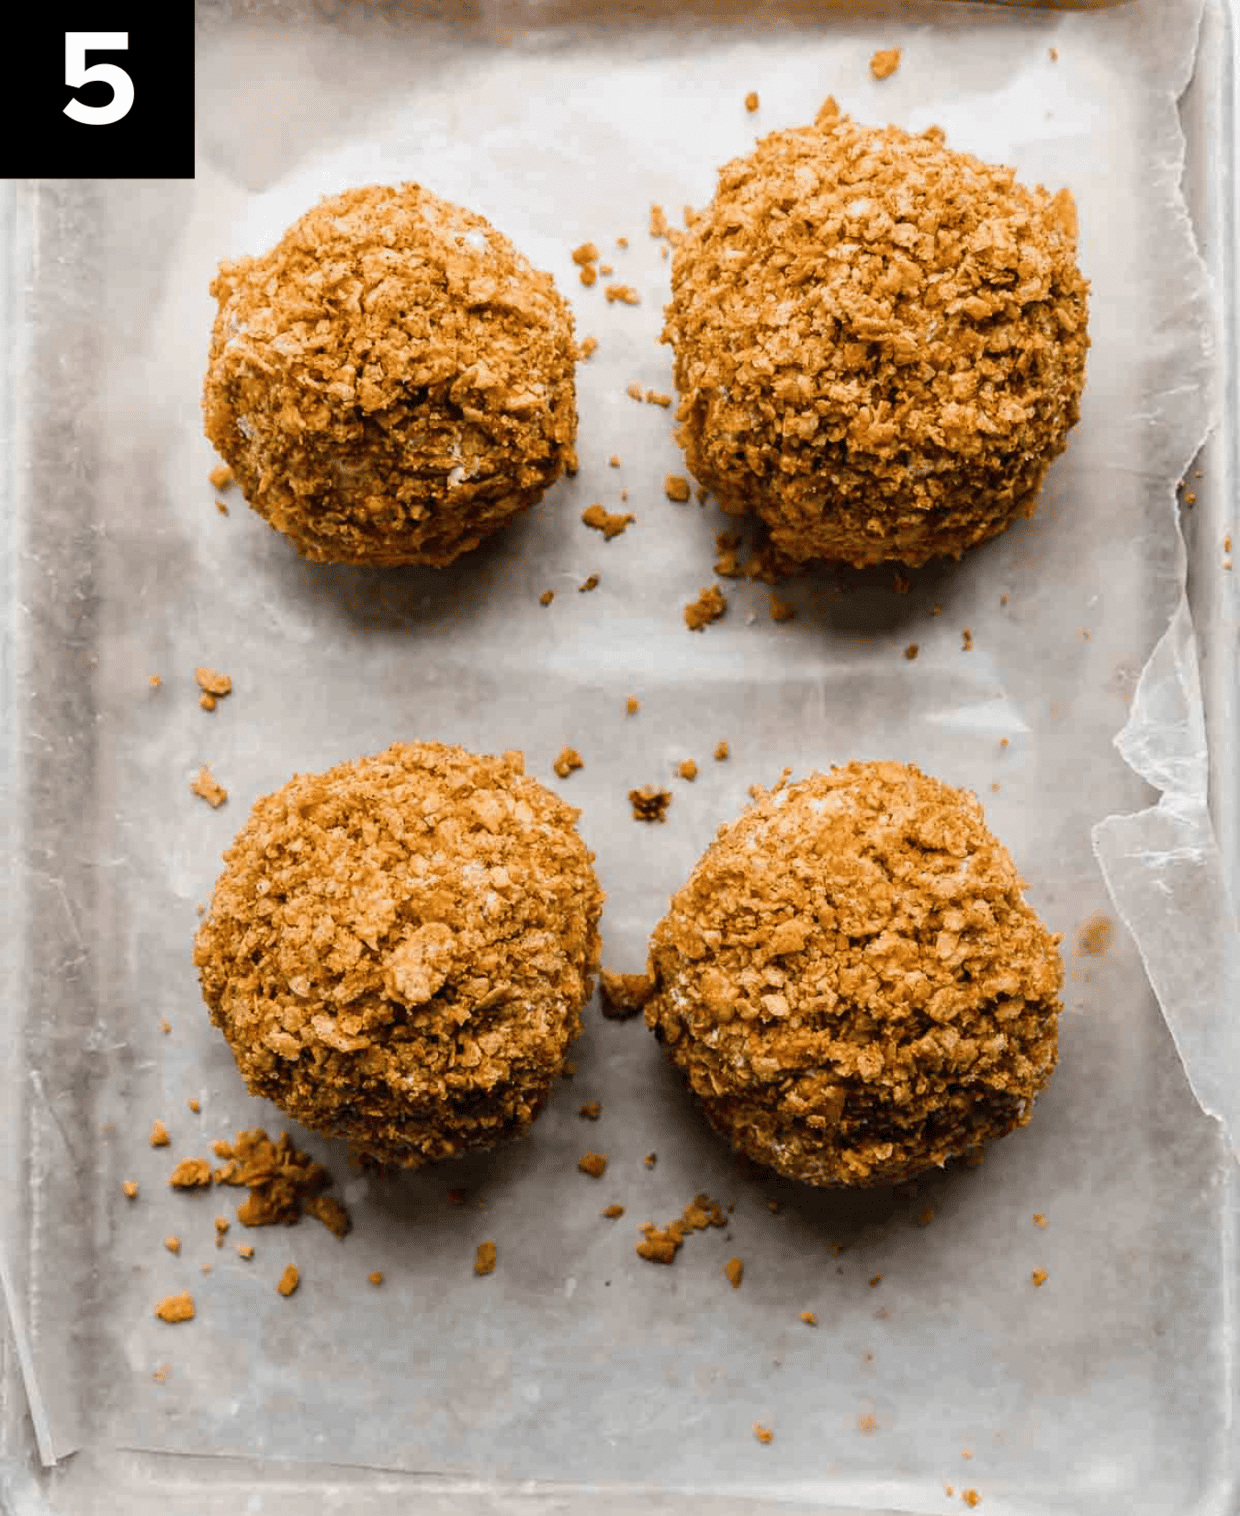 4 No fry Fried Ice Cream balls covered in crushed cornflake cereal on a baking sheet.